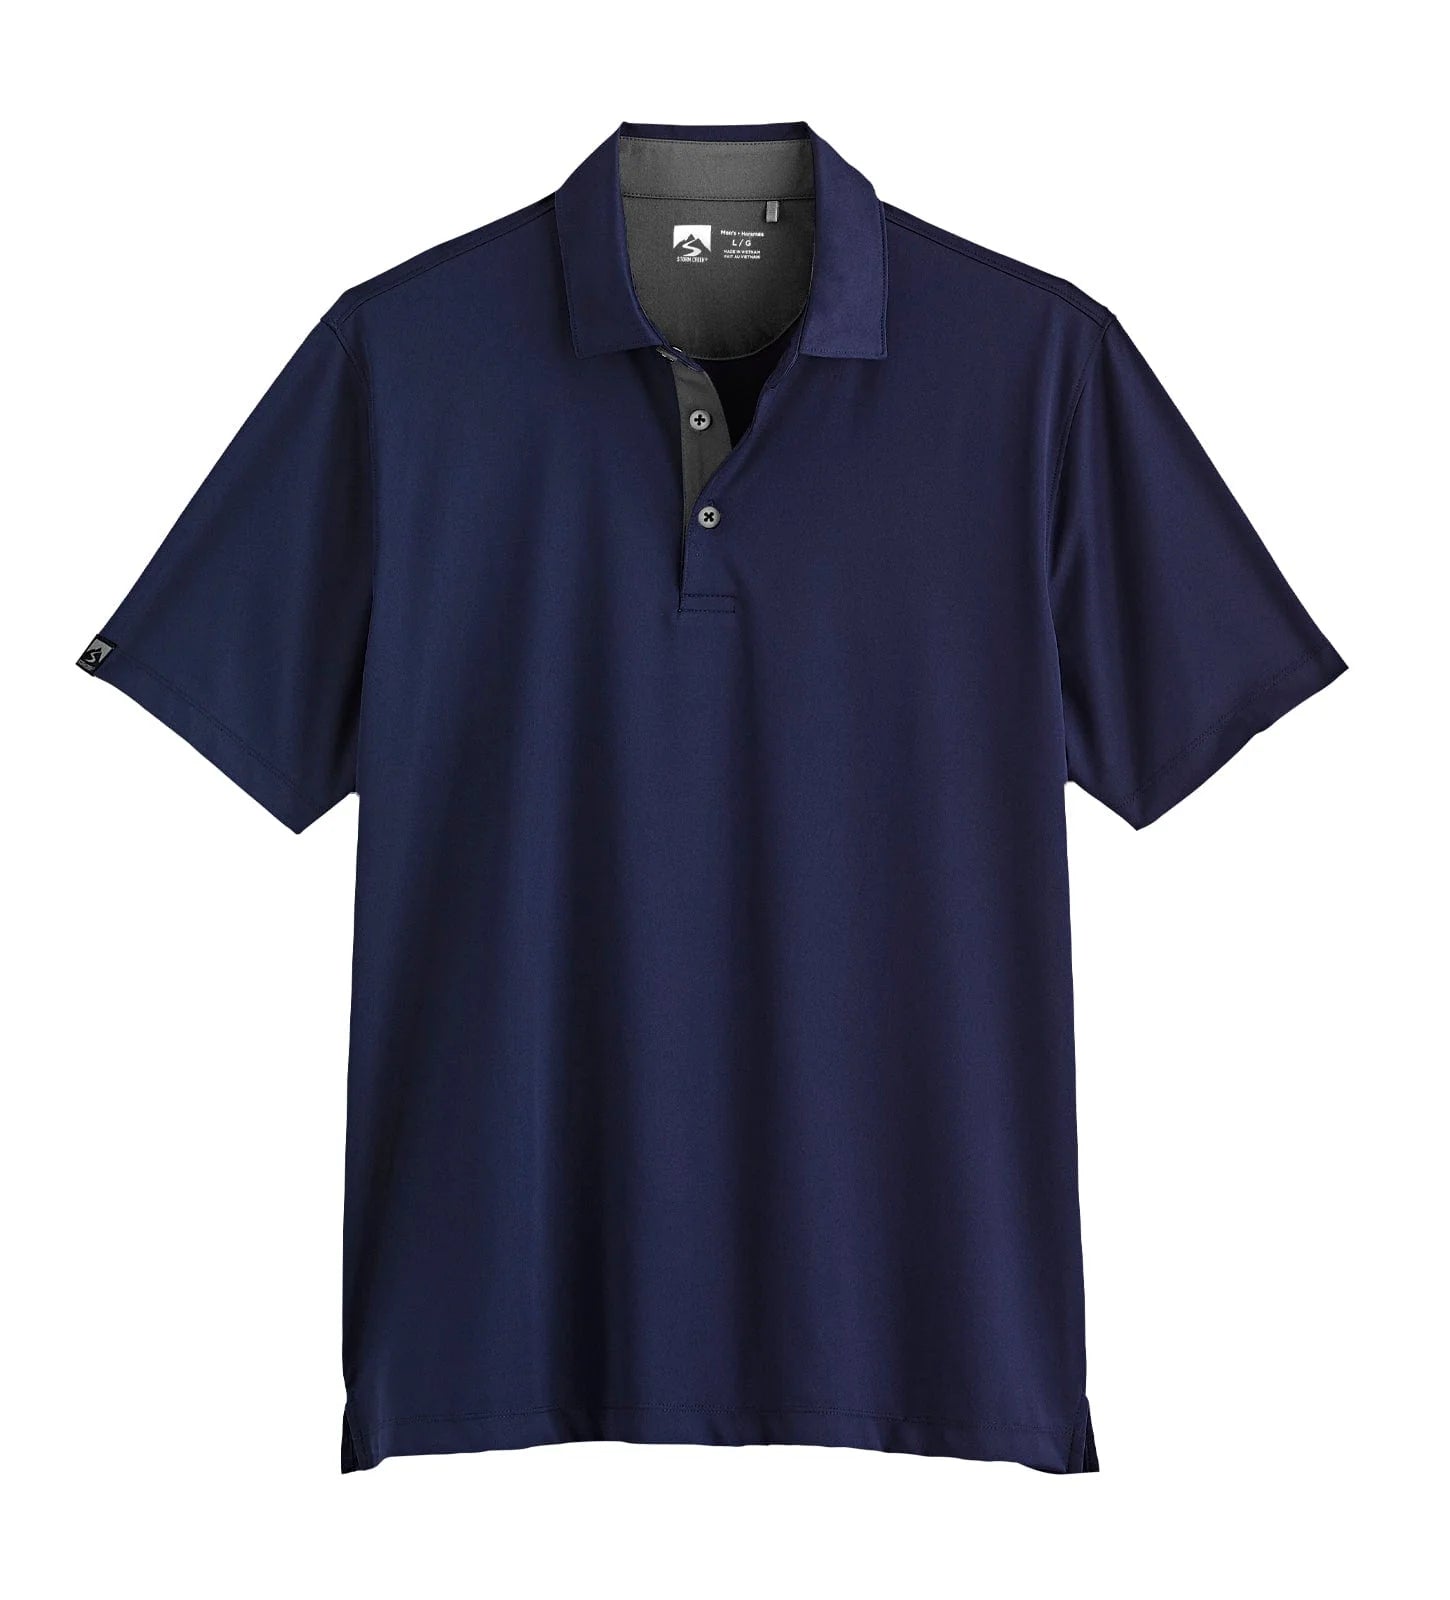 Storm Creek® Men's Recycled Polyester Visionary II in navy